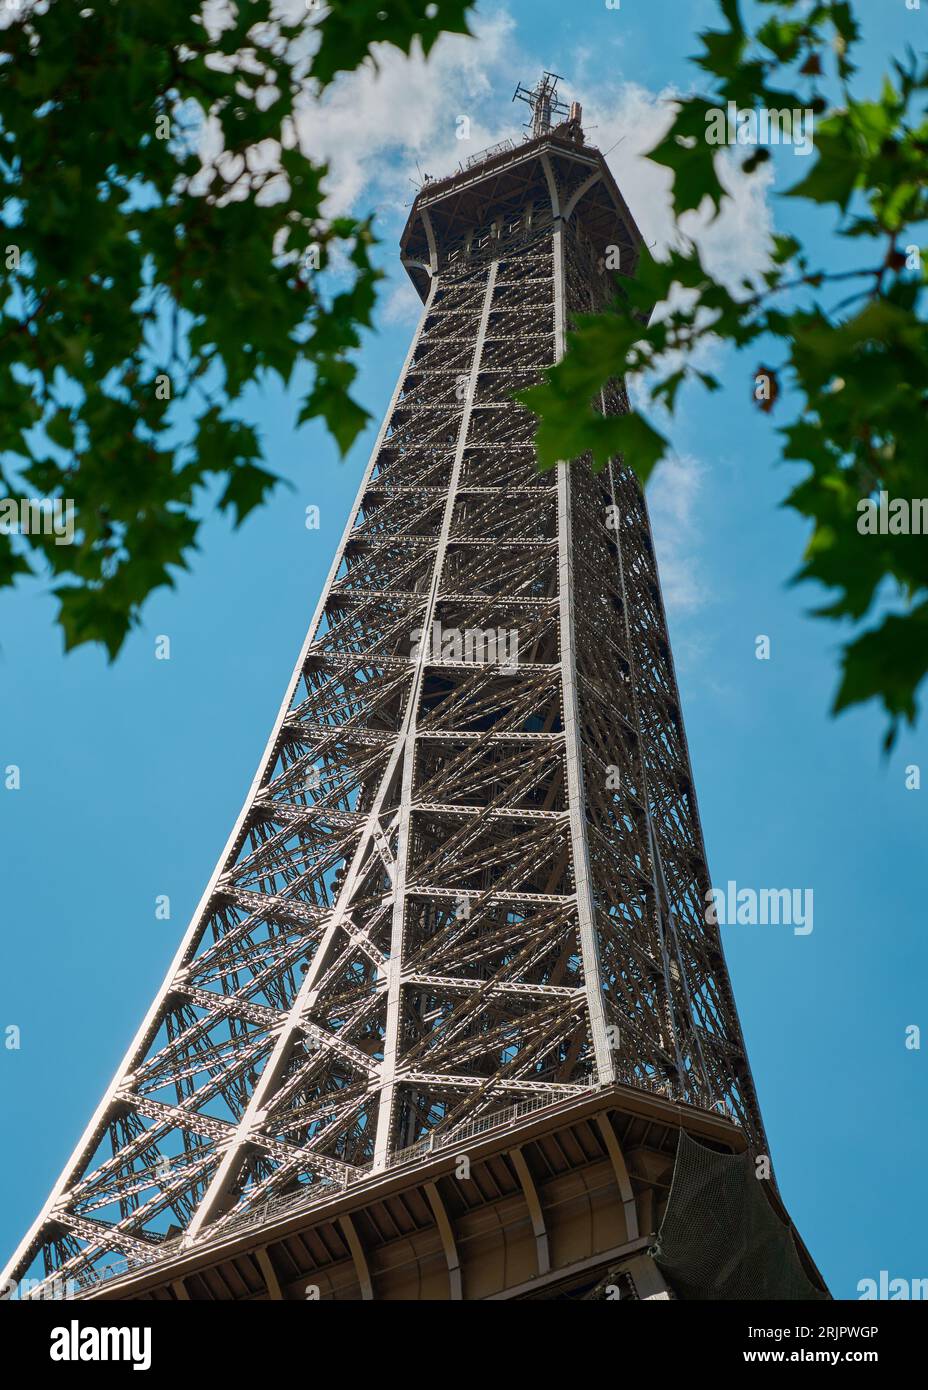 A breathtaking aerial view of the iconic Eiffel Tower in Paris, France, taken from a vantage point in a nearby wooded area Stock Photo